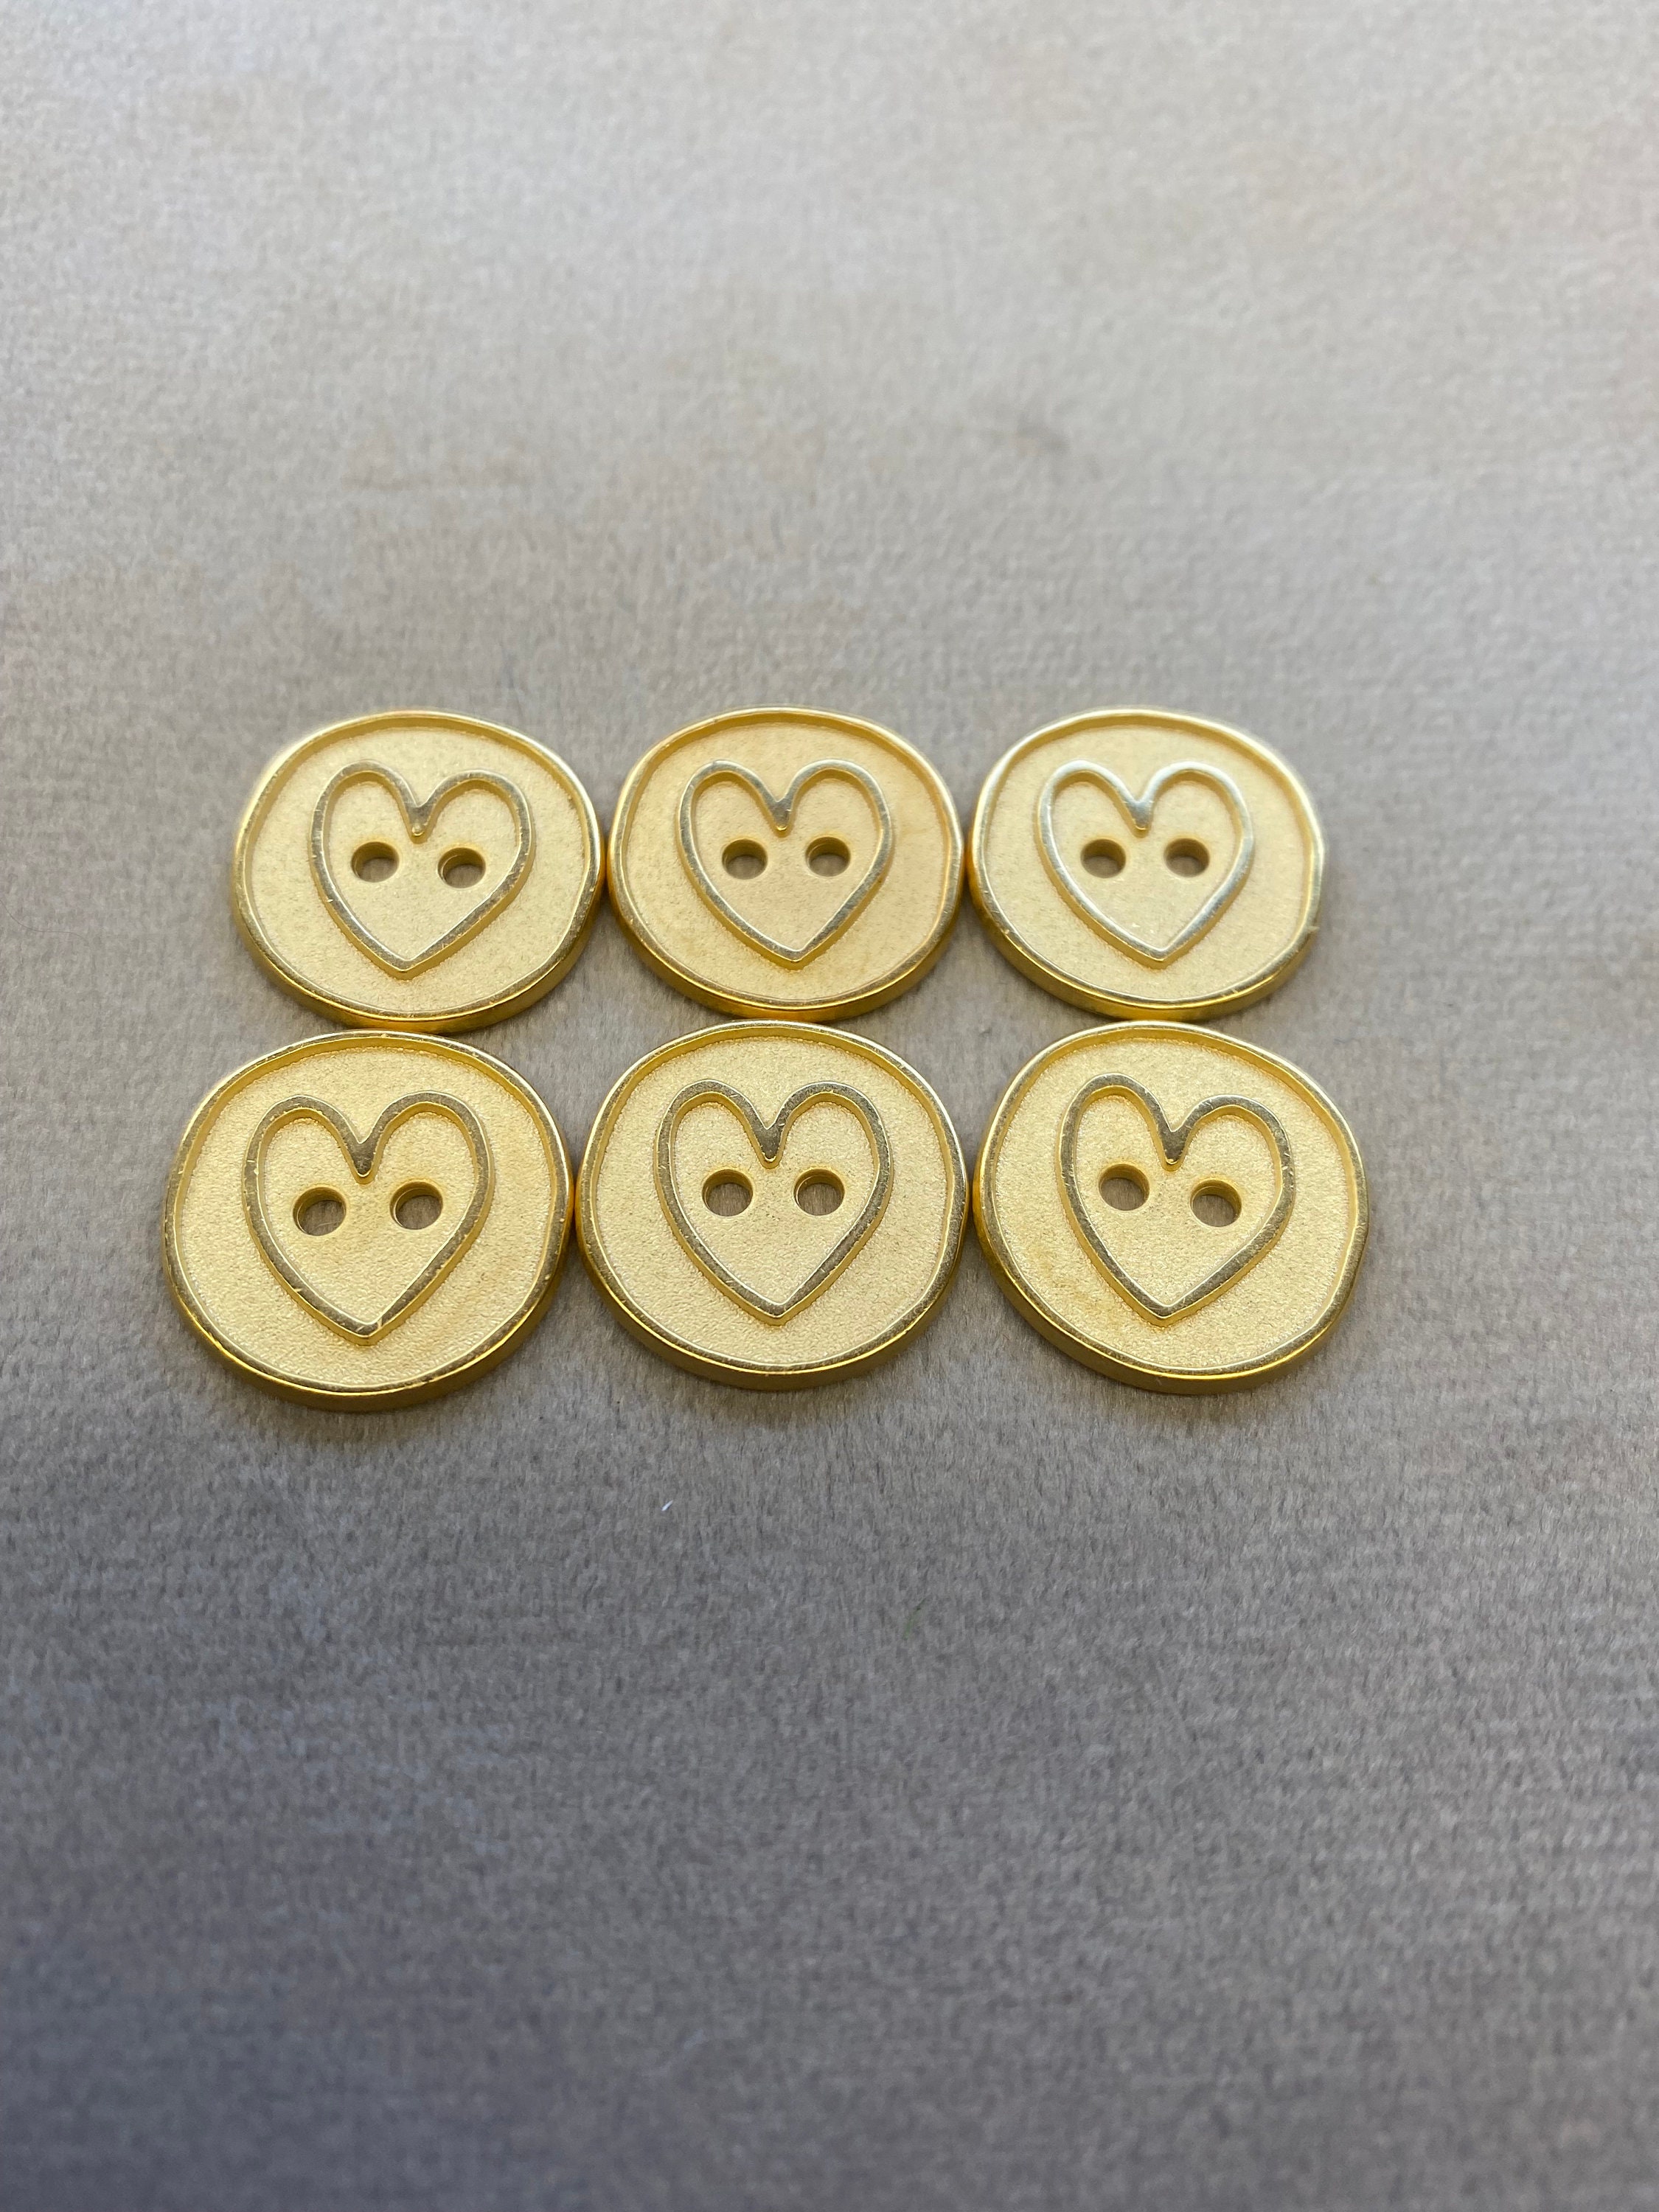 3 Rustic Metal Heart Buttons 22k Matte Gold Plated - Round Silver Buttons,  Metal Shank Button, Sewing Buttons, Jewelry Making Buttons